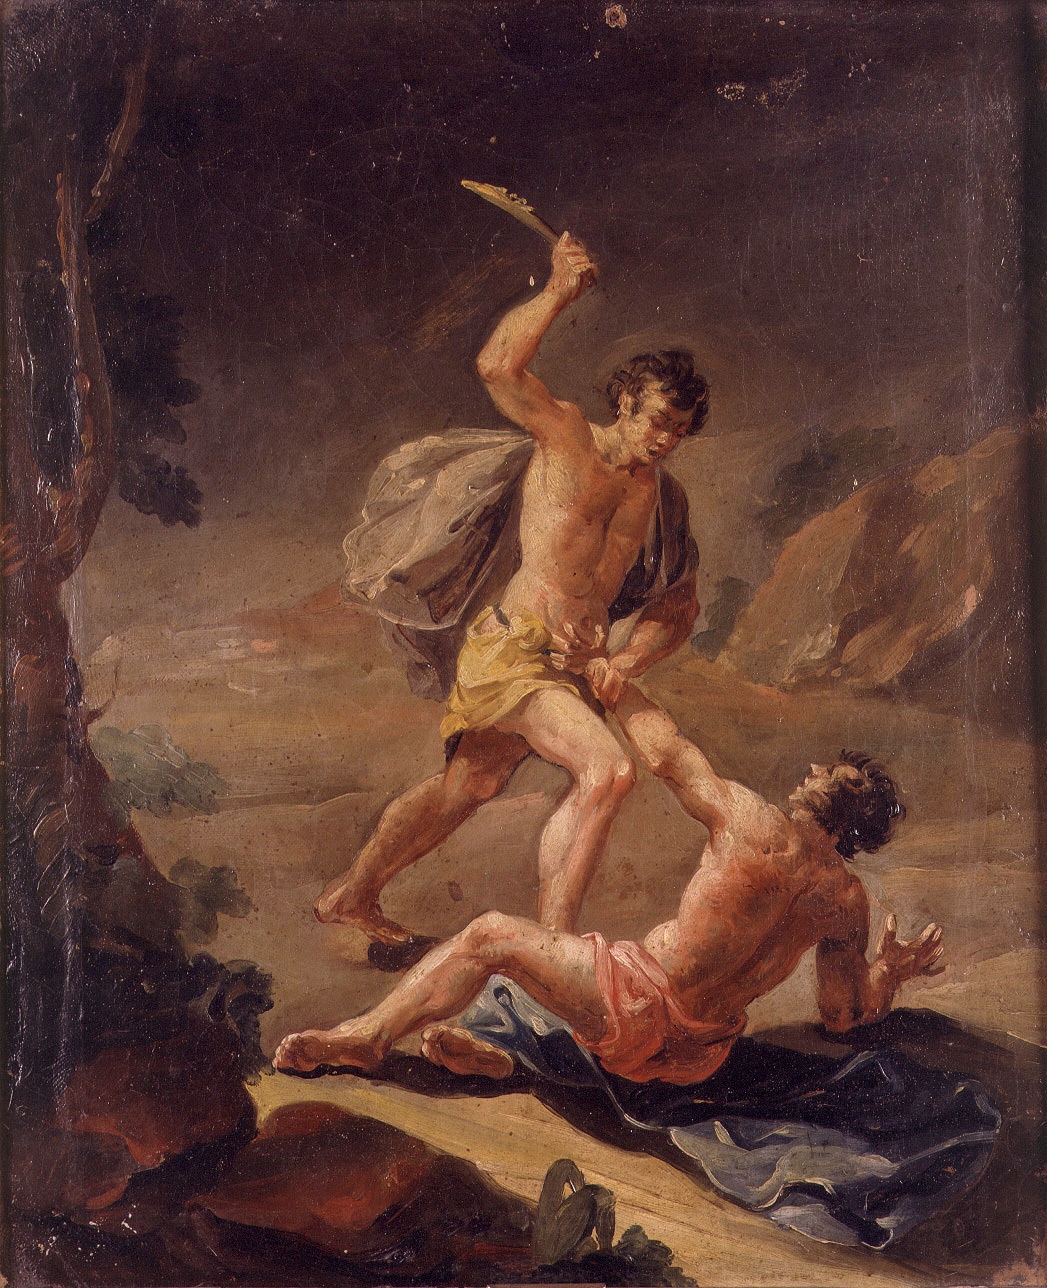 cain and abel kali